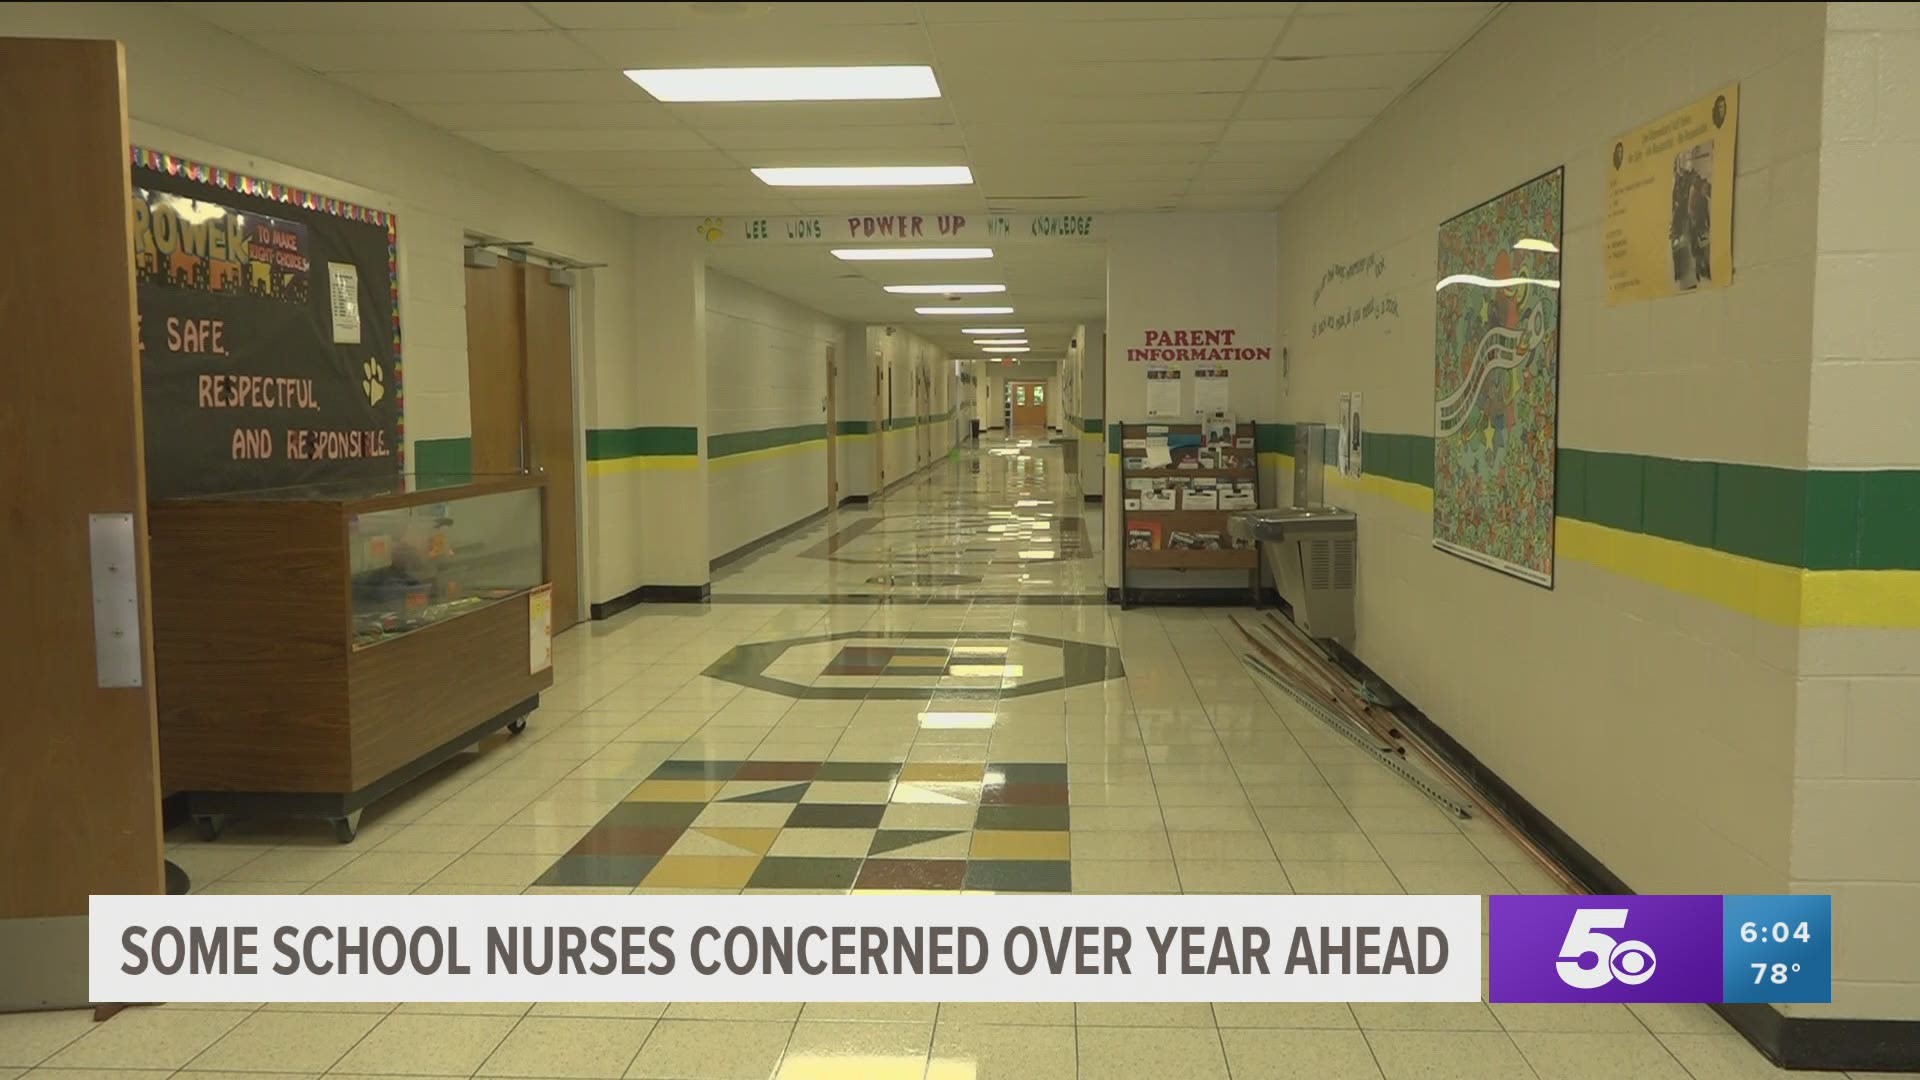 5NEWS spoke with some school nurses in our area about the added pressure they are feeling for this school year. https://bit.ly/2PrLHEF